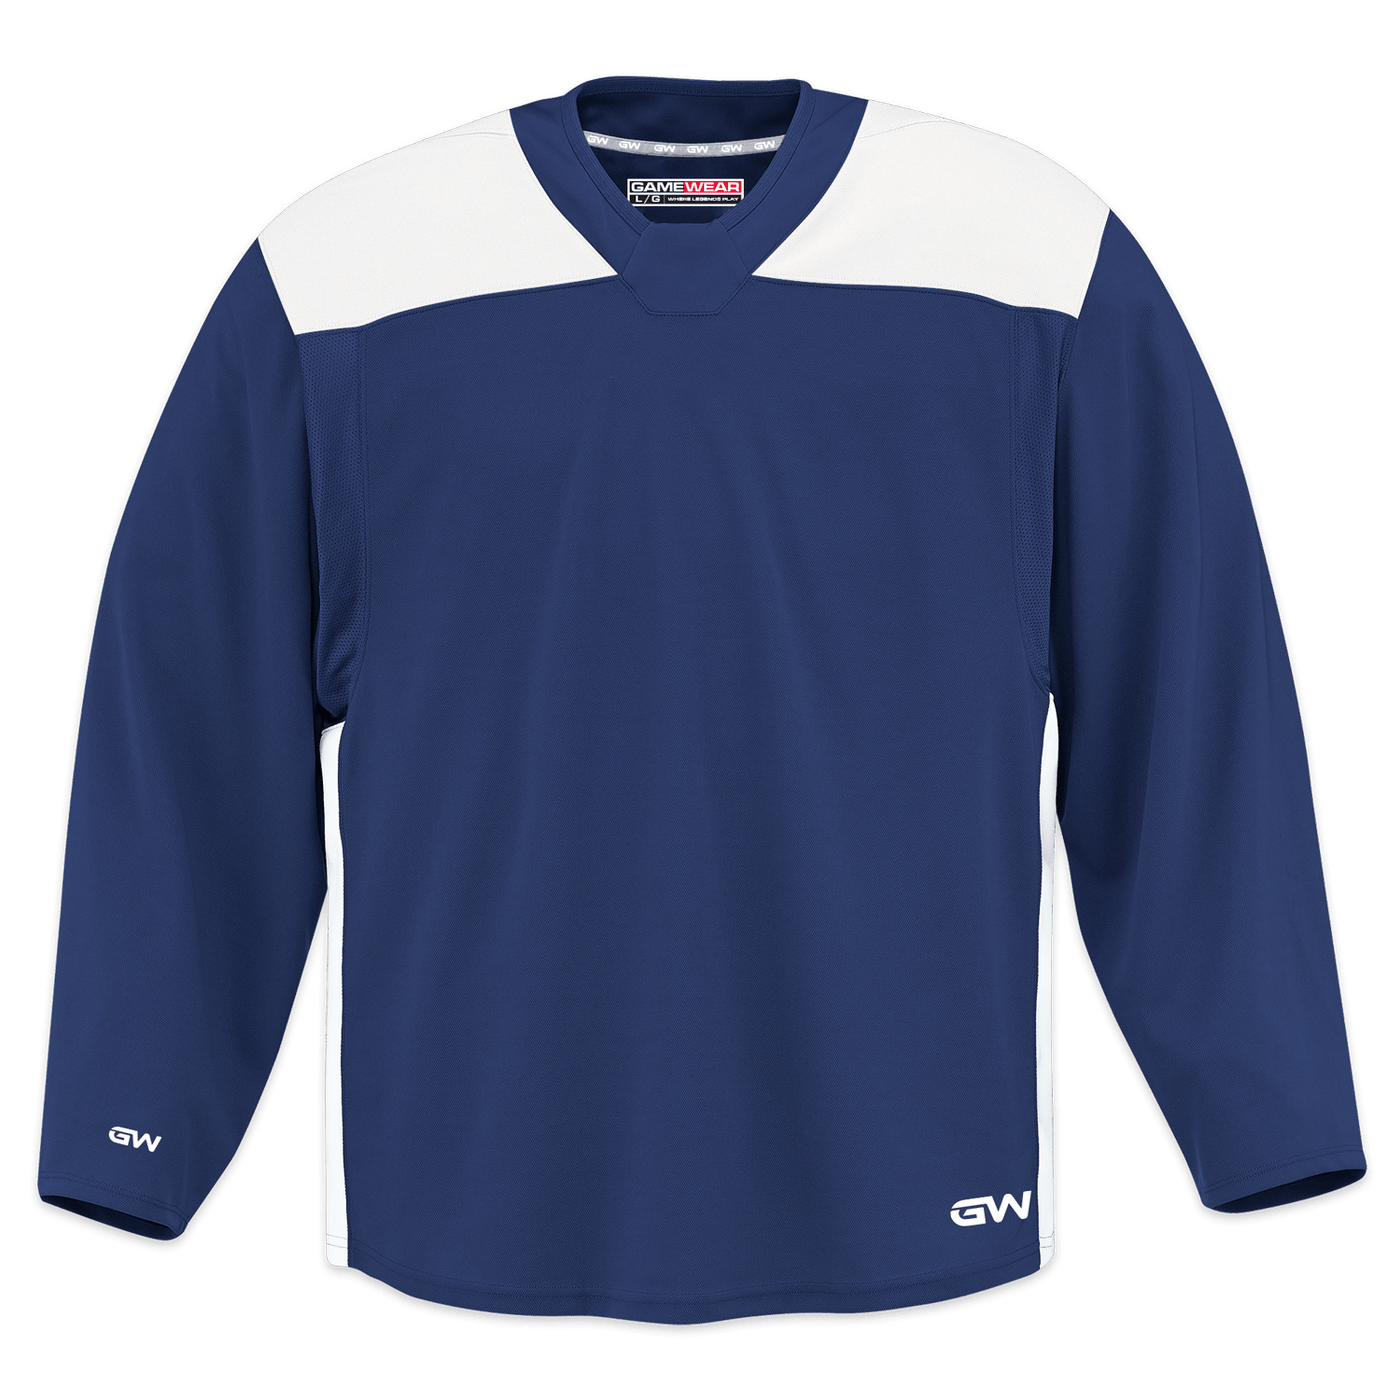 GameWear GW6500 ProLite Series Junior Hockey Practice Jersey - Navy / White - The Hockey Shop Source For Sports